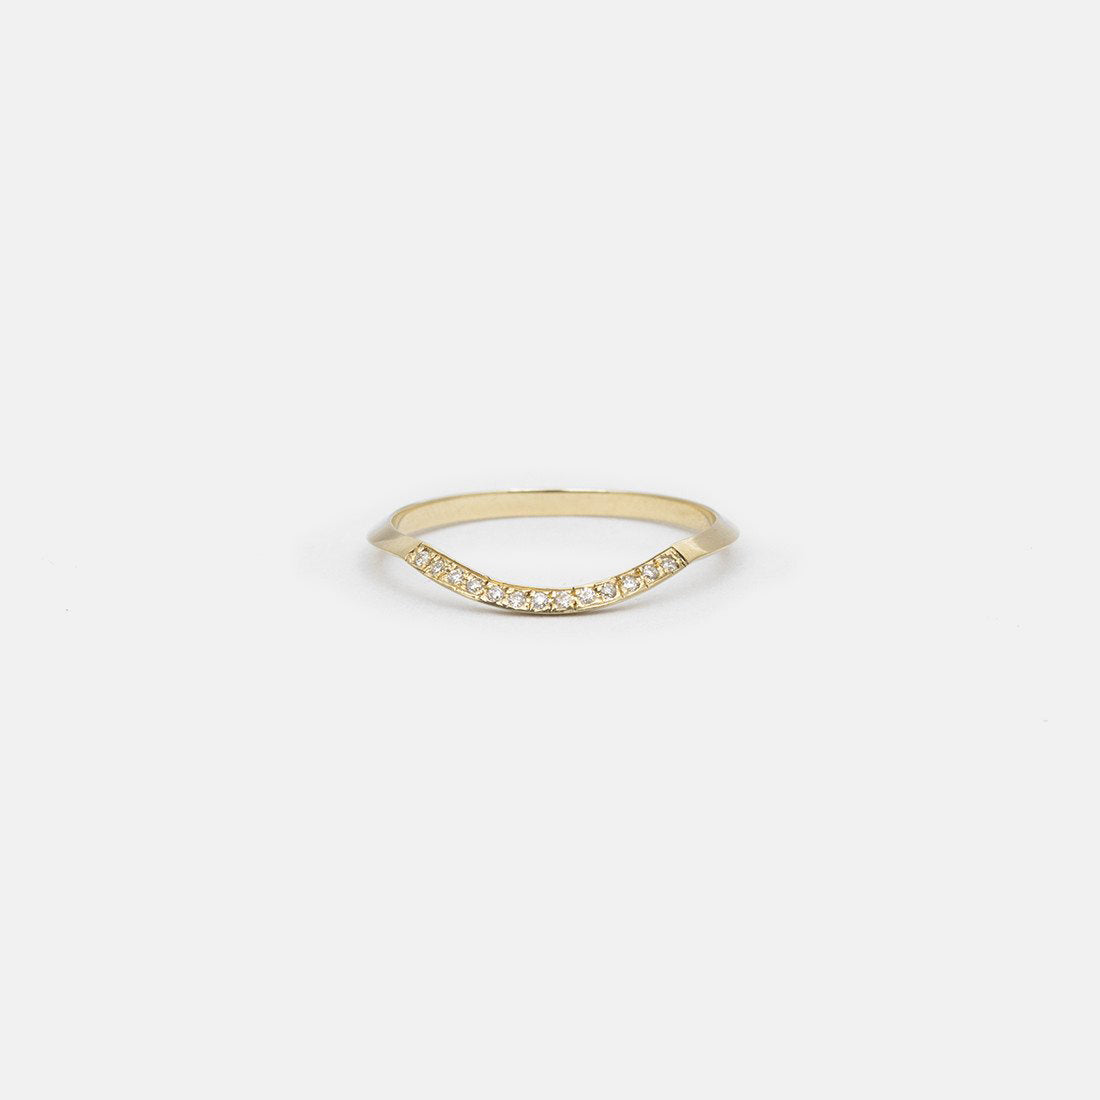 Arba Unique Ring in 14k Gold set with White Diamonds By SHW Fine Jewelry NYC